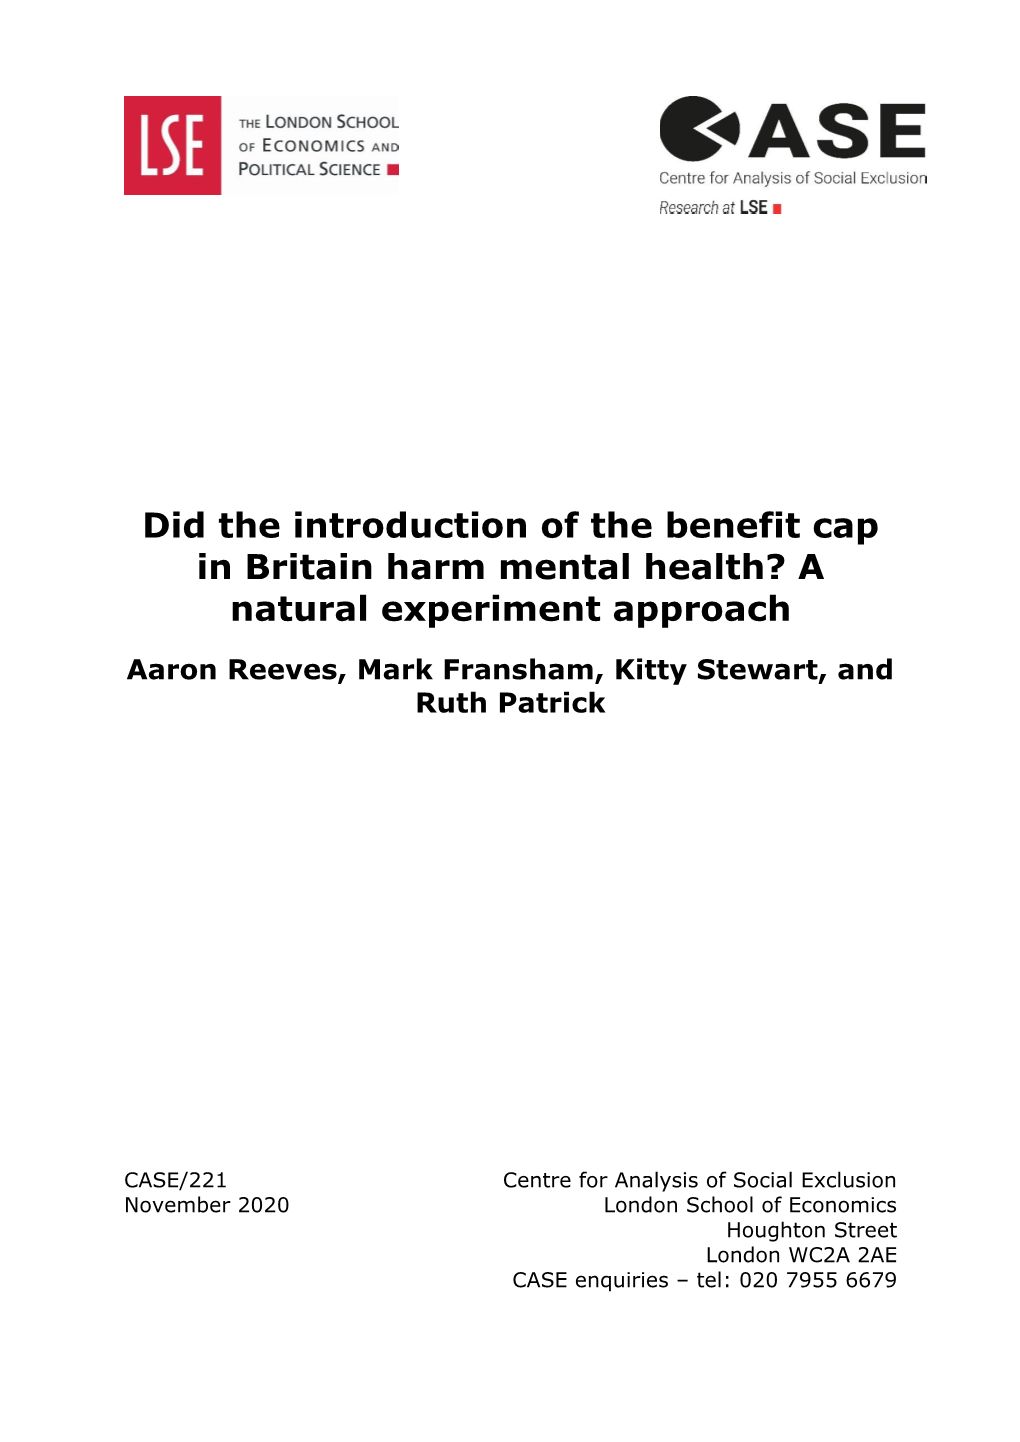 Did the Introduction of the Benefit Cap in Britain Harm Mental Health? a Natural Experiment Approach